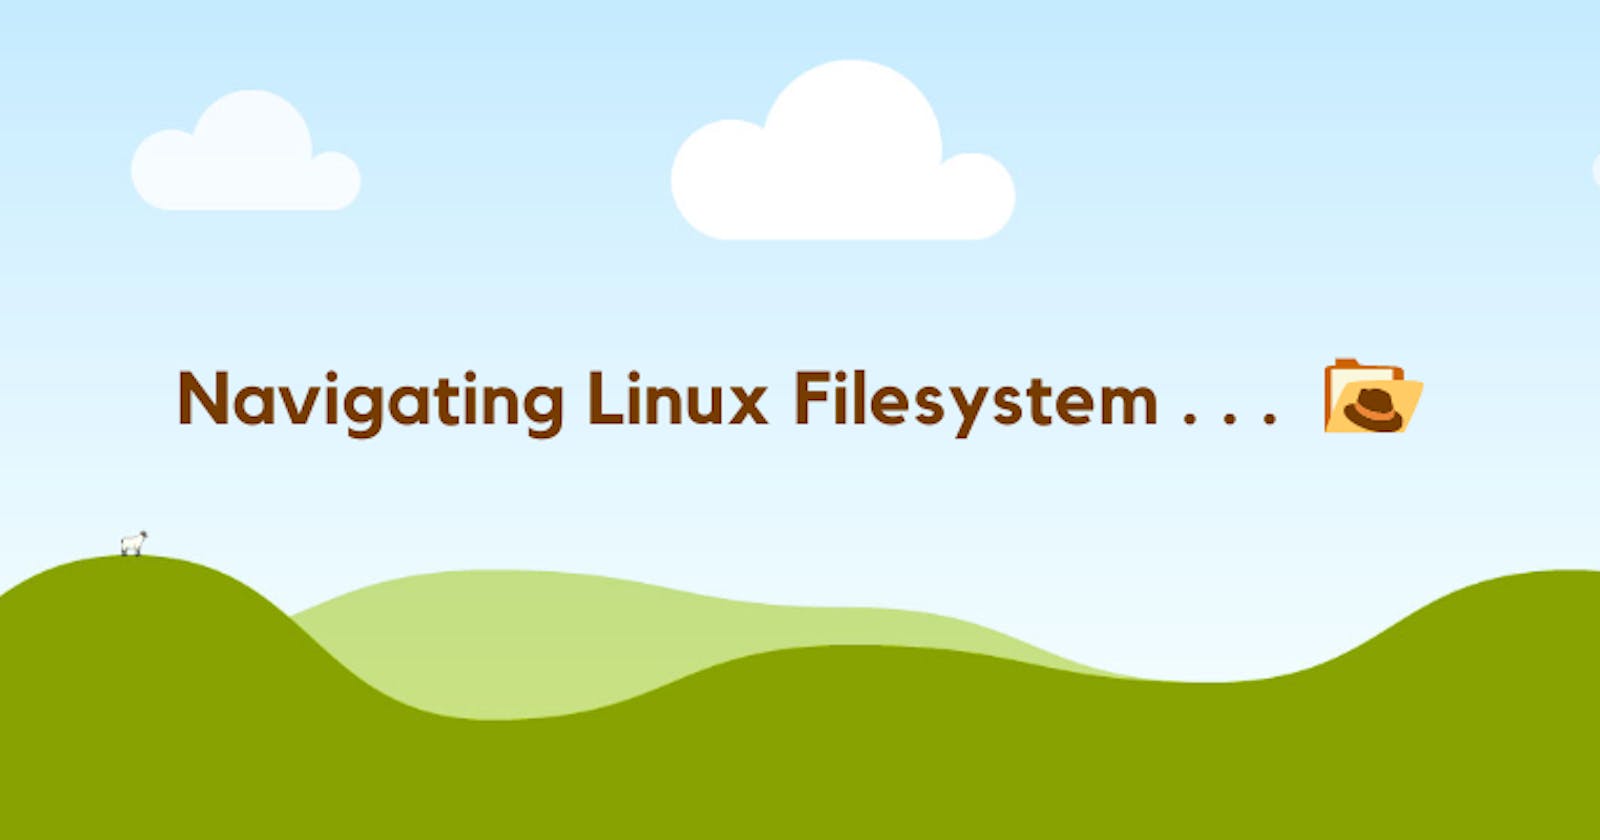 Navigating  filesystem in the Linux terminal - Part1